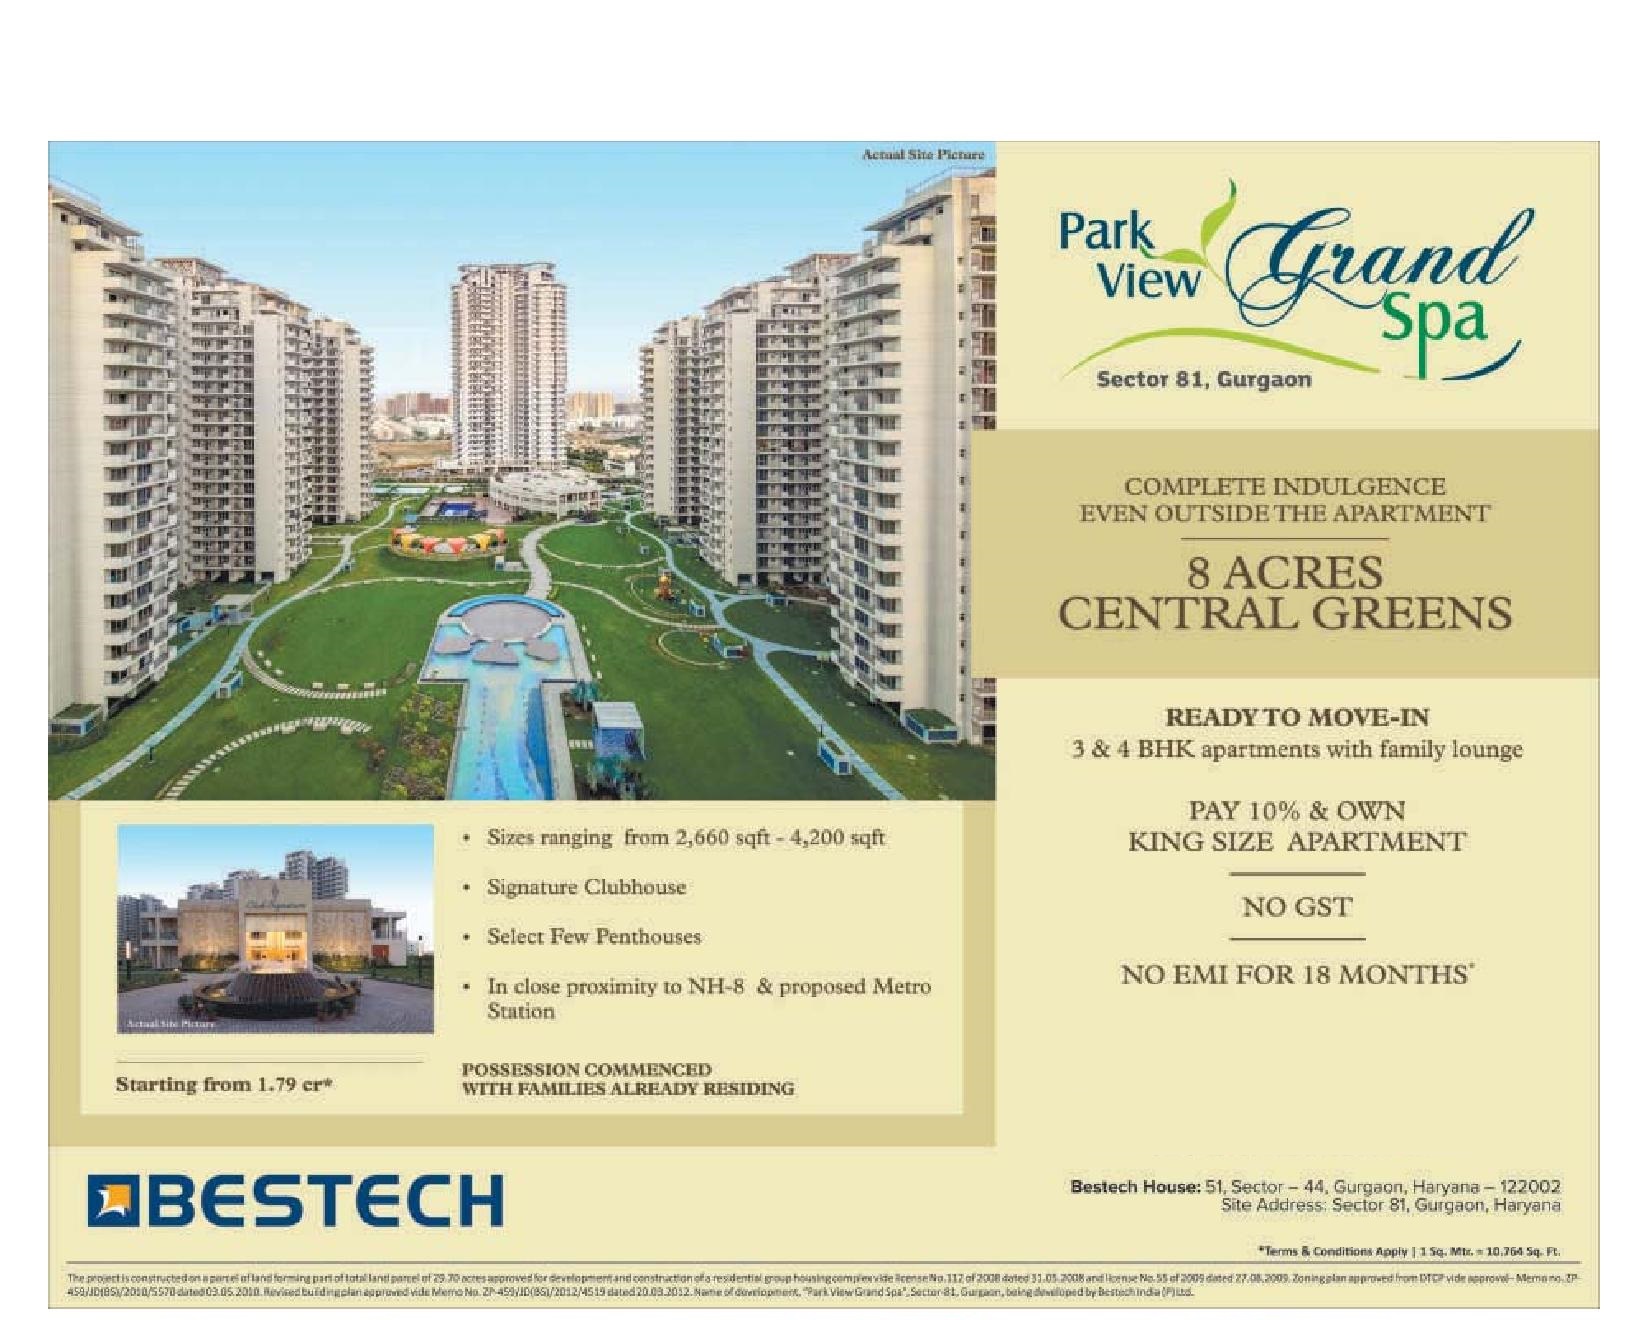 Pay just 10% & own king size apartment at Bestech Park View Grand Spa in Gurgaon Update